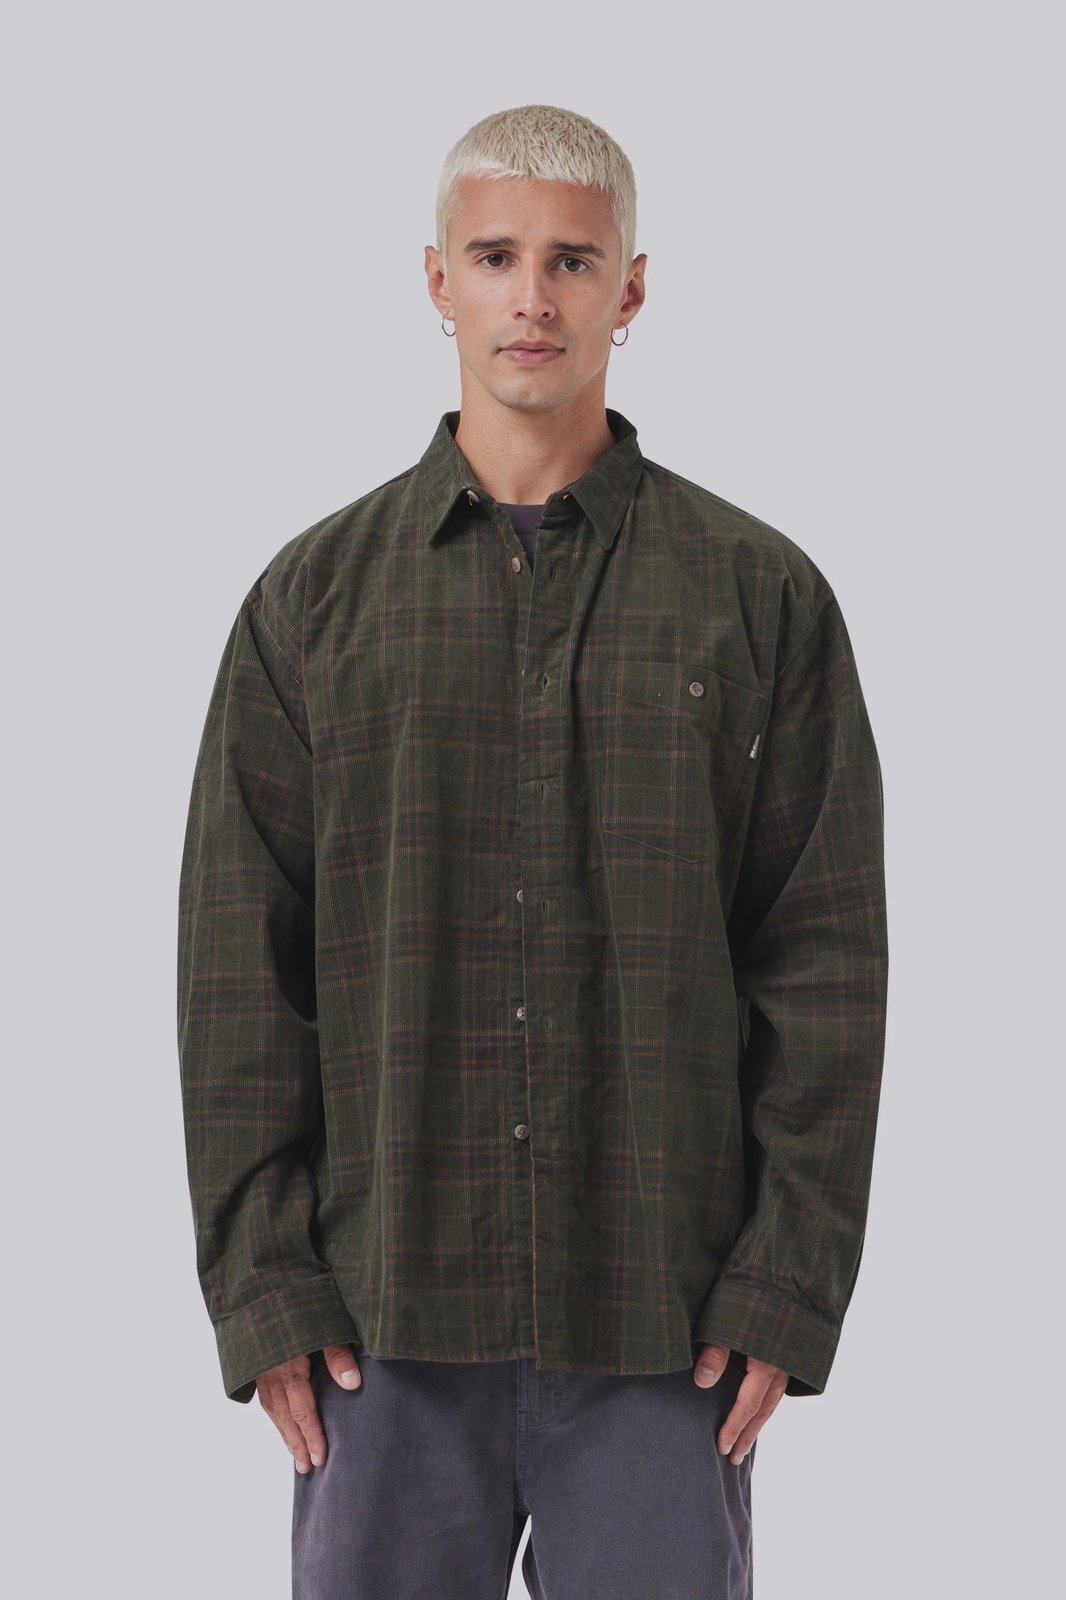 Barney Cools Cabin 2.0 Shirt Forest Cord Plaid